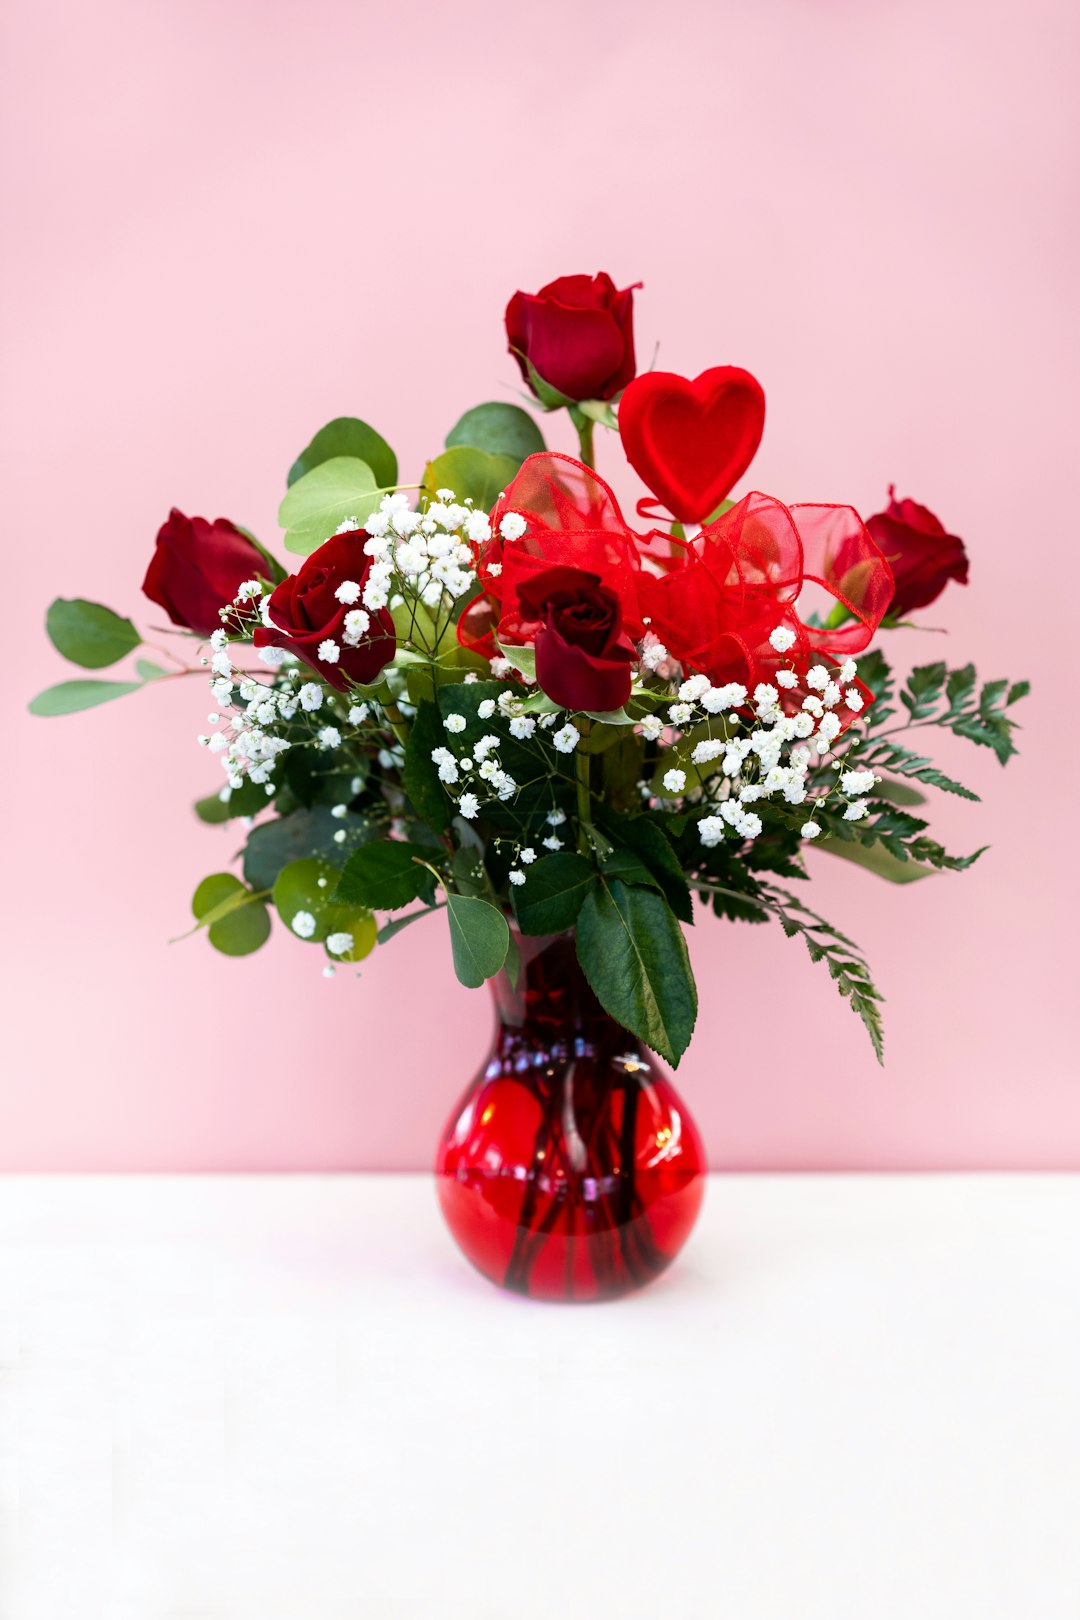 red and white flowers in red glass vase